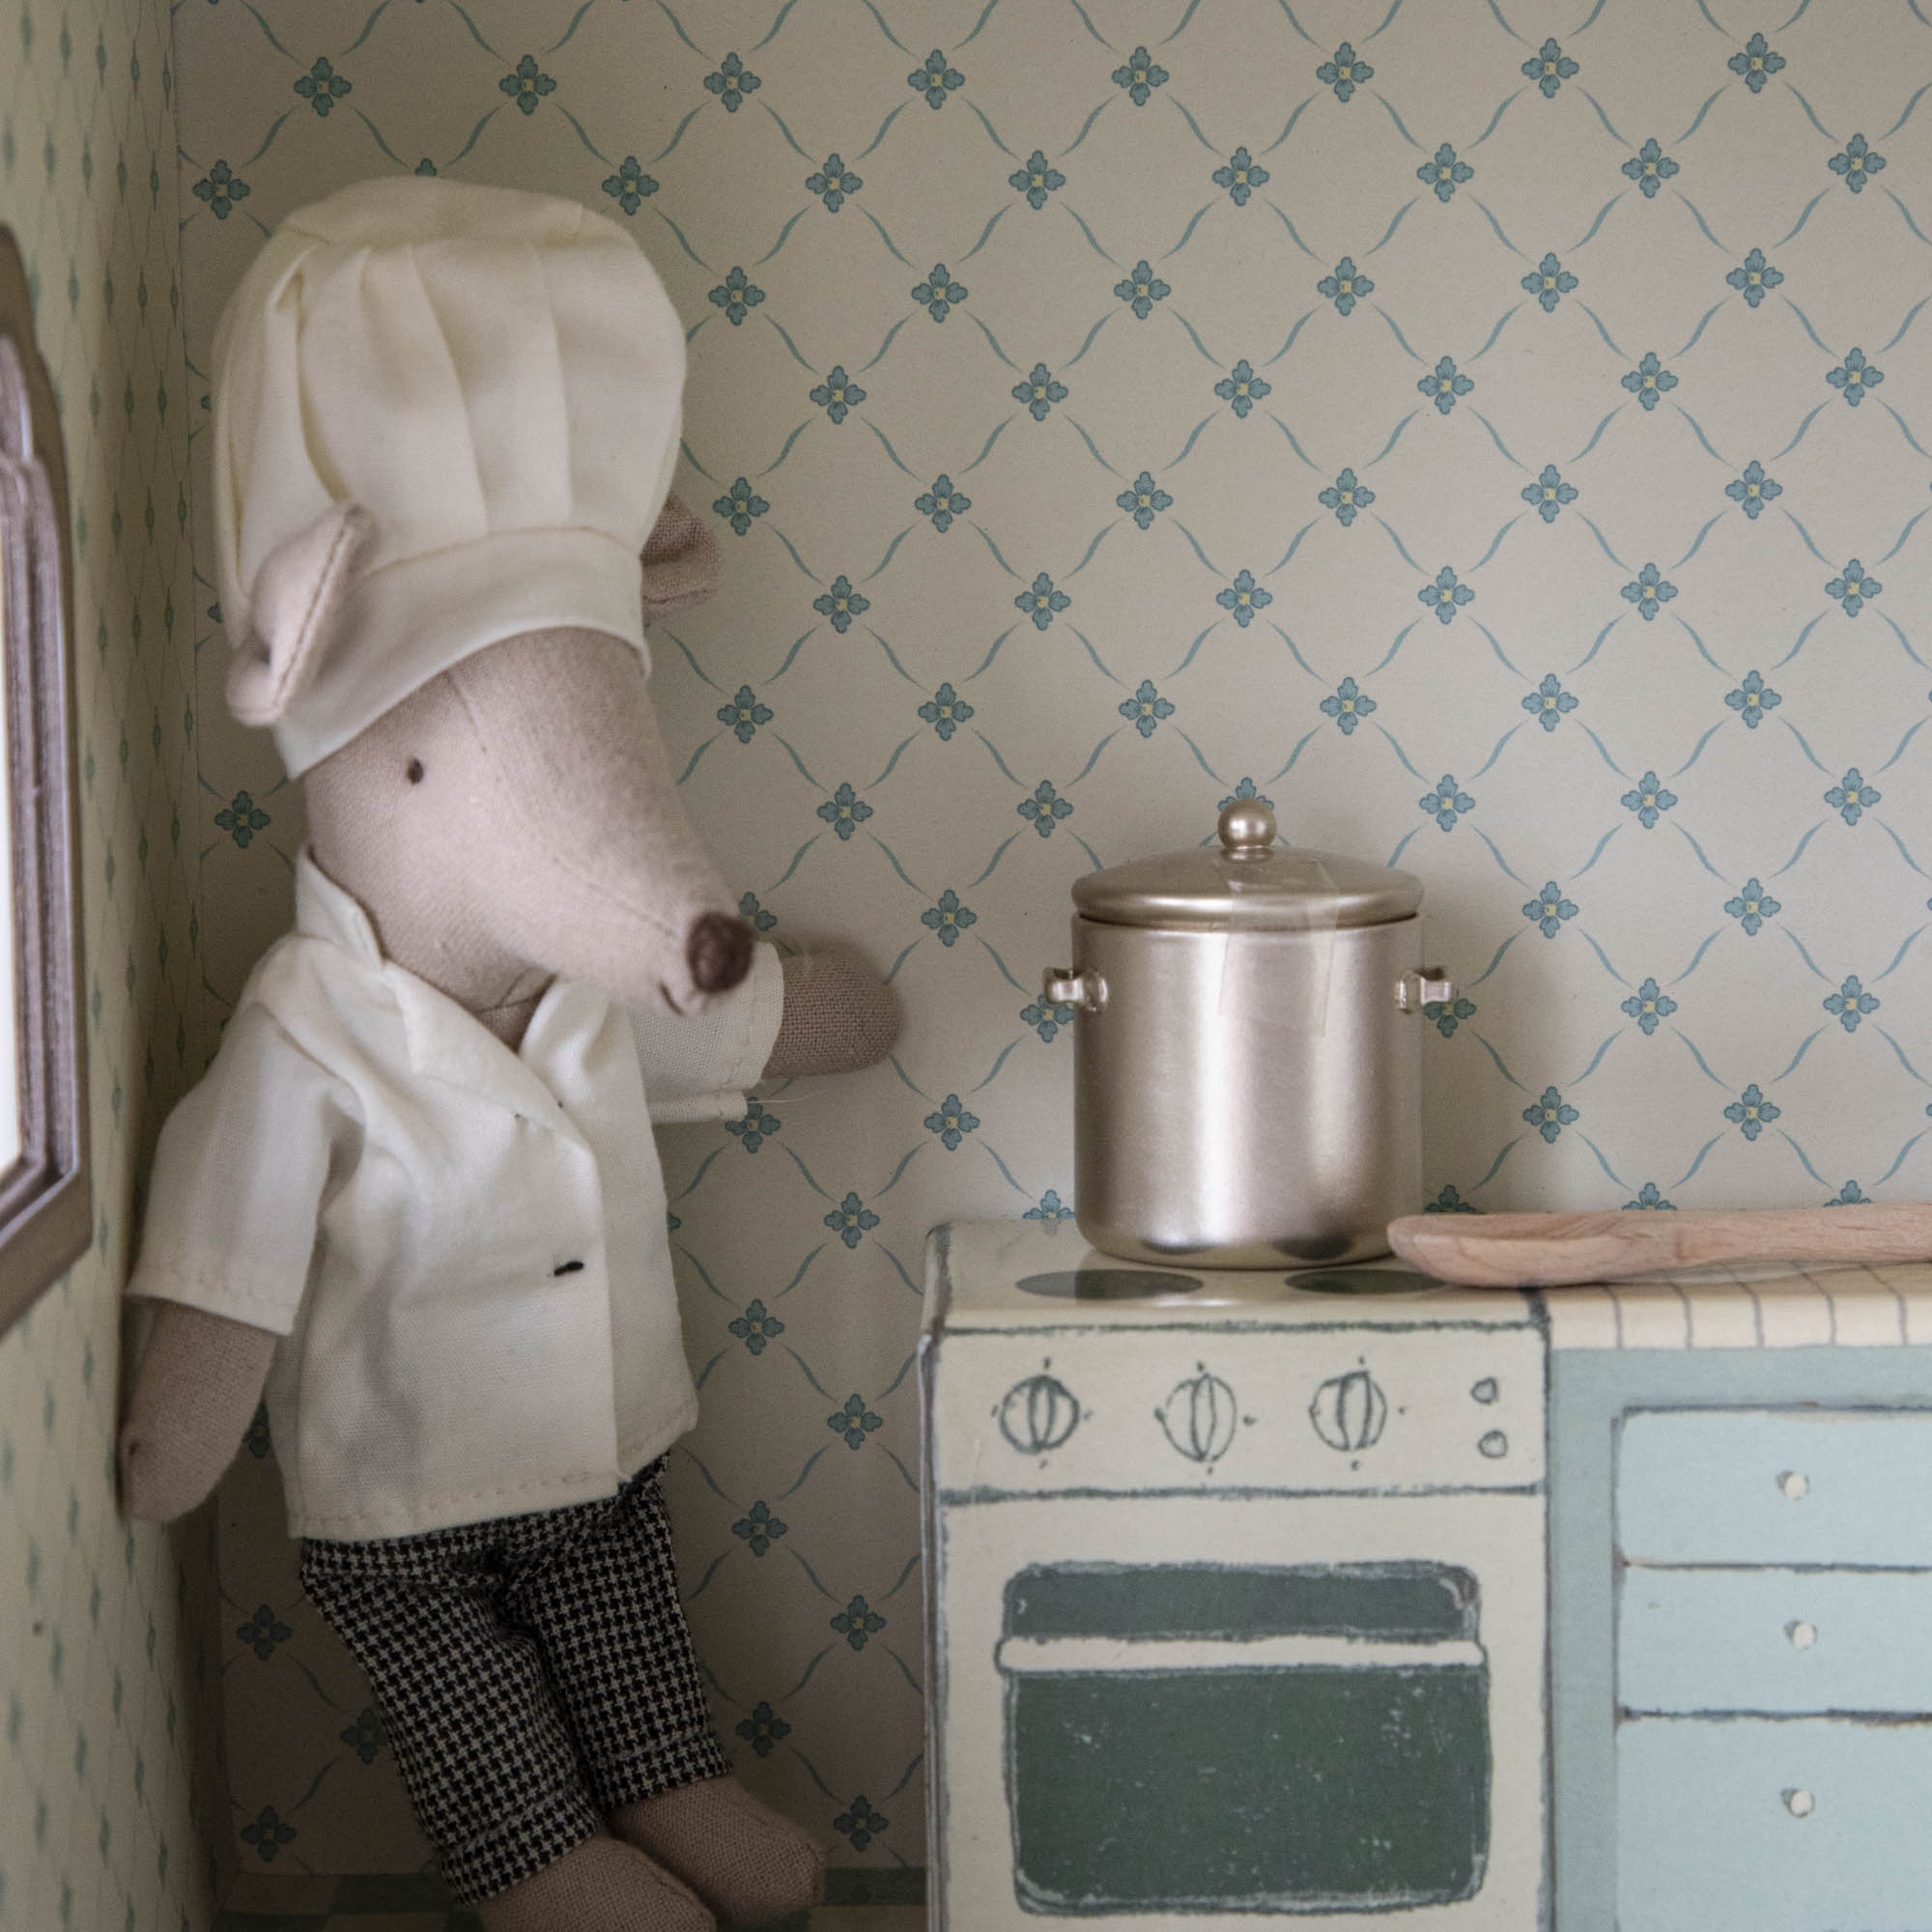 Chef Mouse with Soup Pot and Spoon from the Maileg kitchen collection dressed as a chef standing in a miniature playset environment.